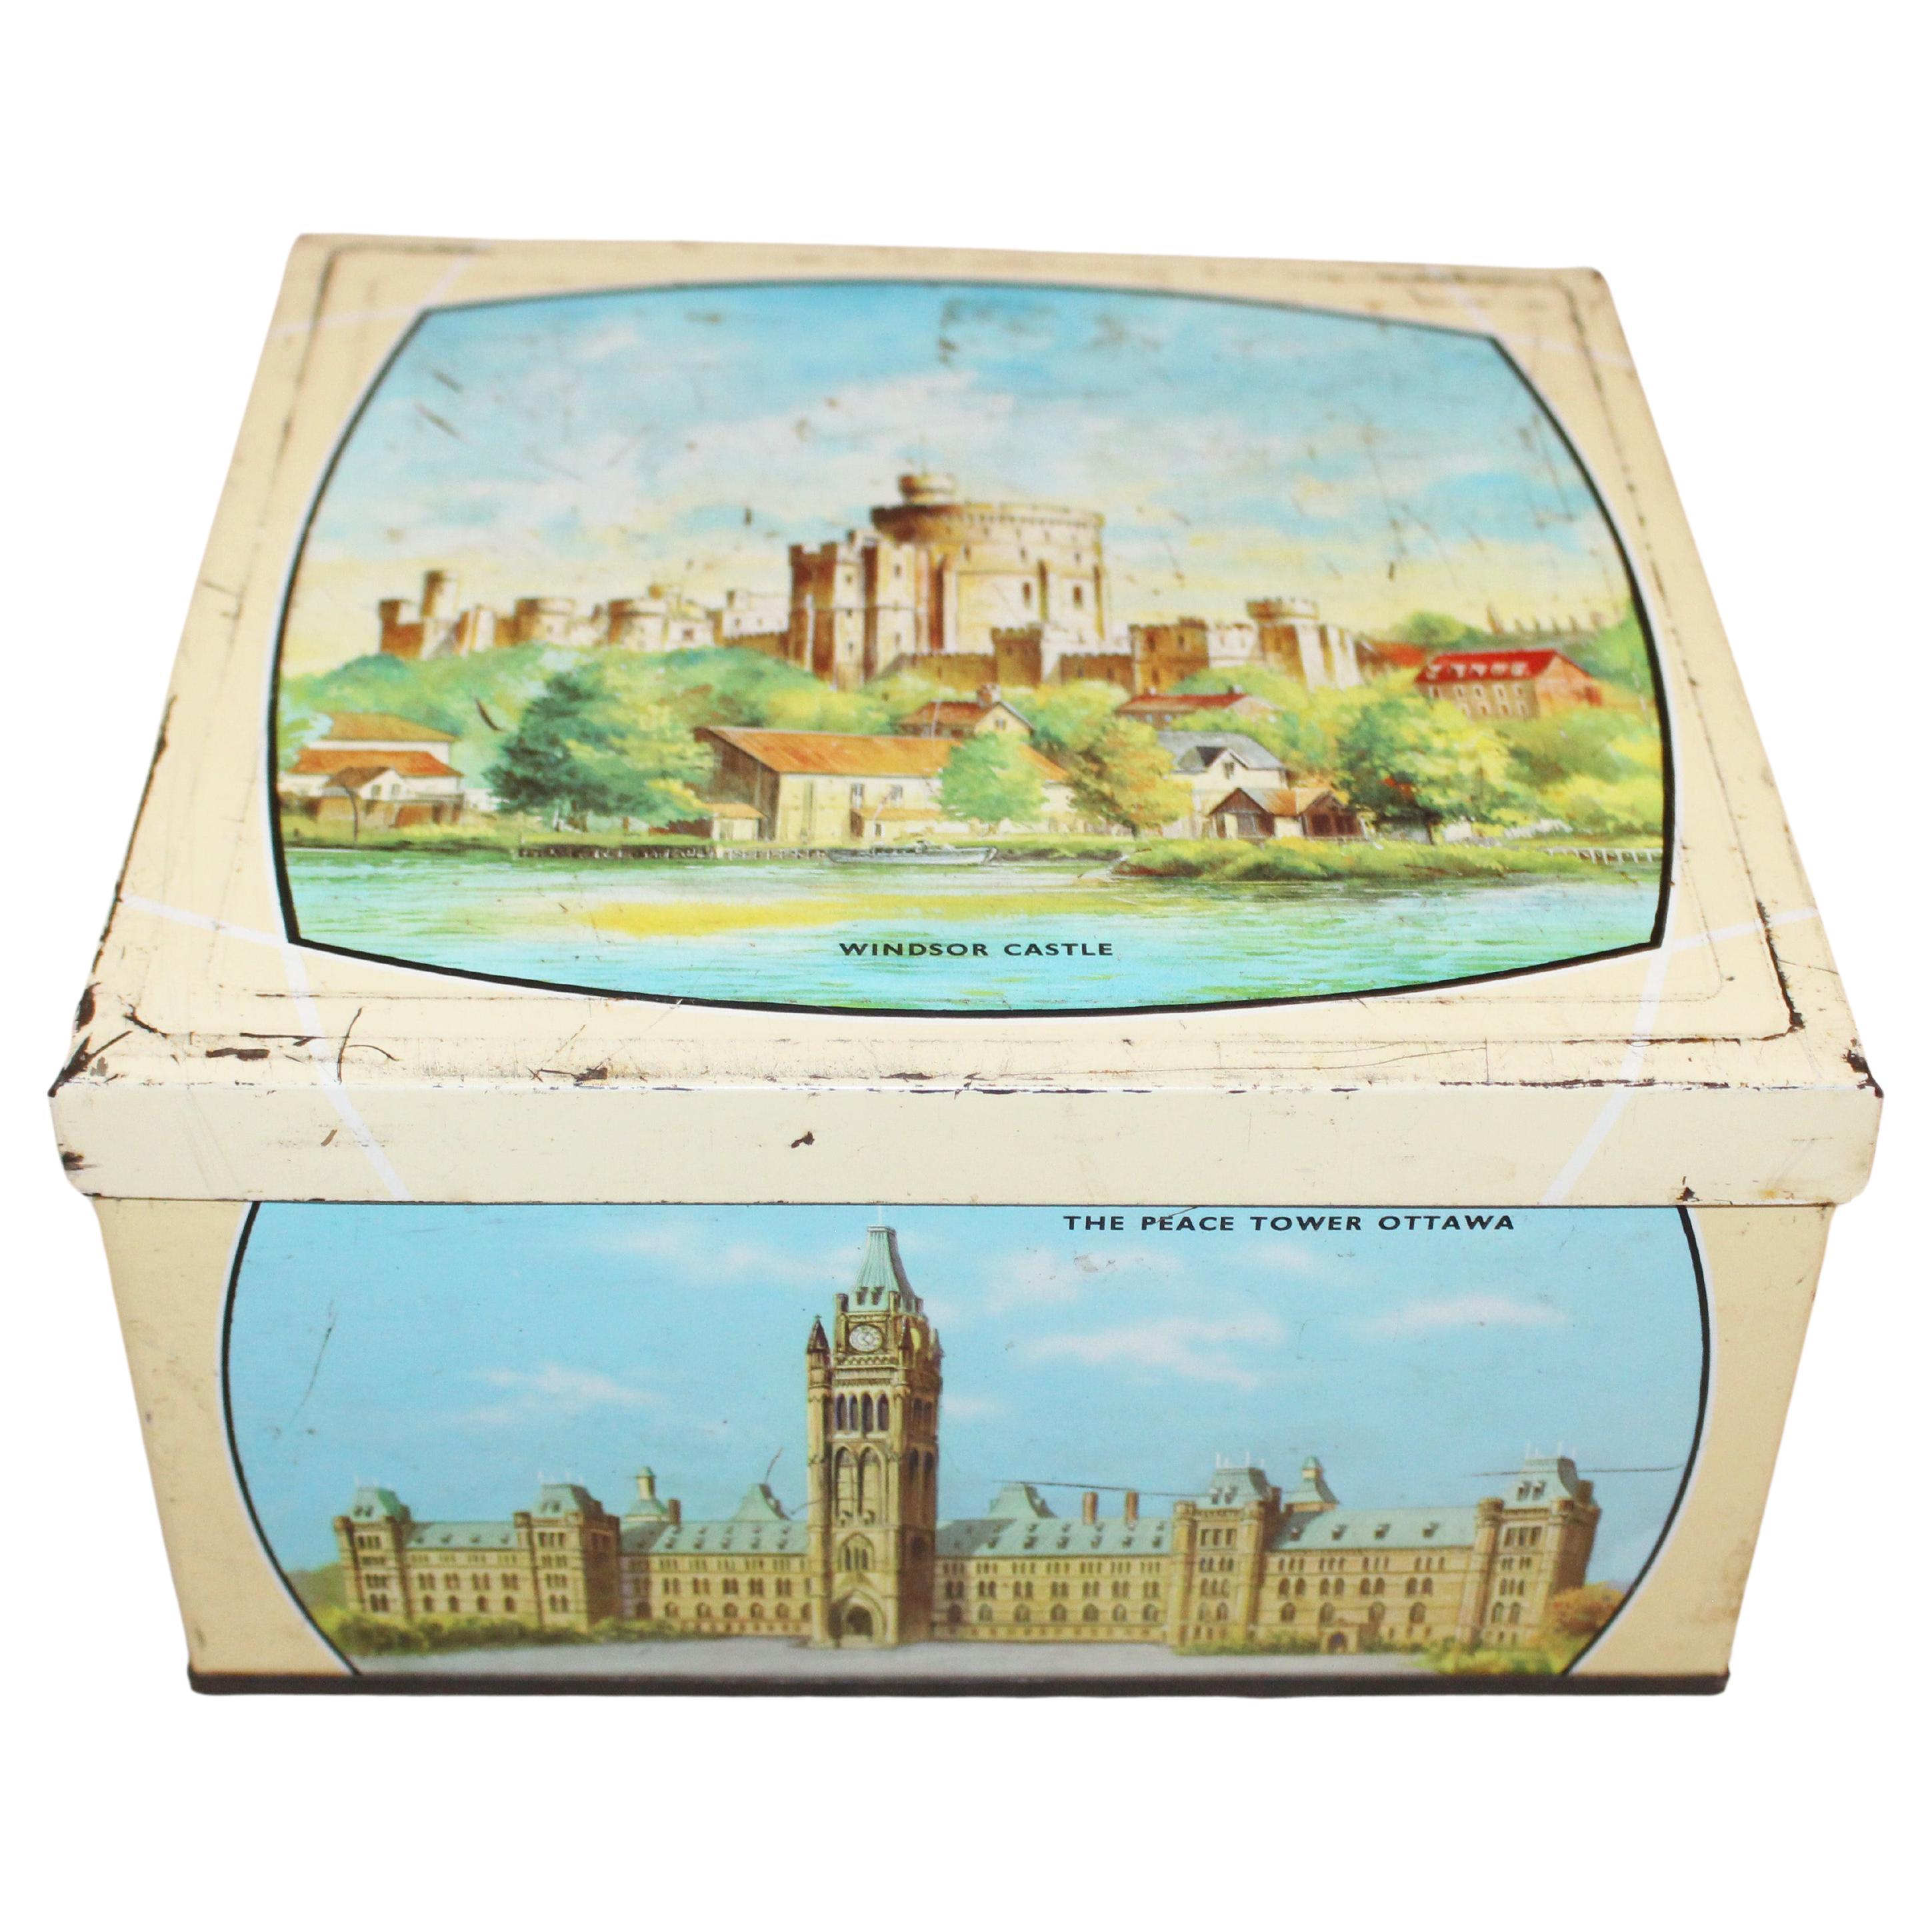 Early 20th Century Biscuit Tin "The British Commonwealth"